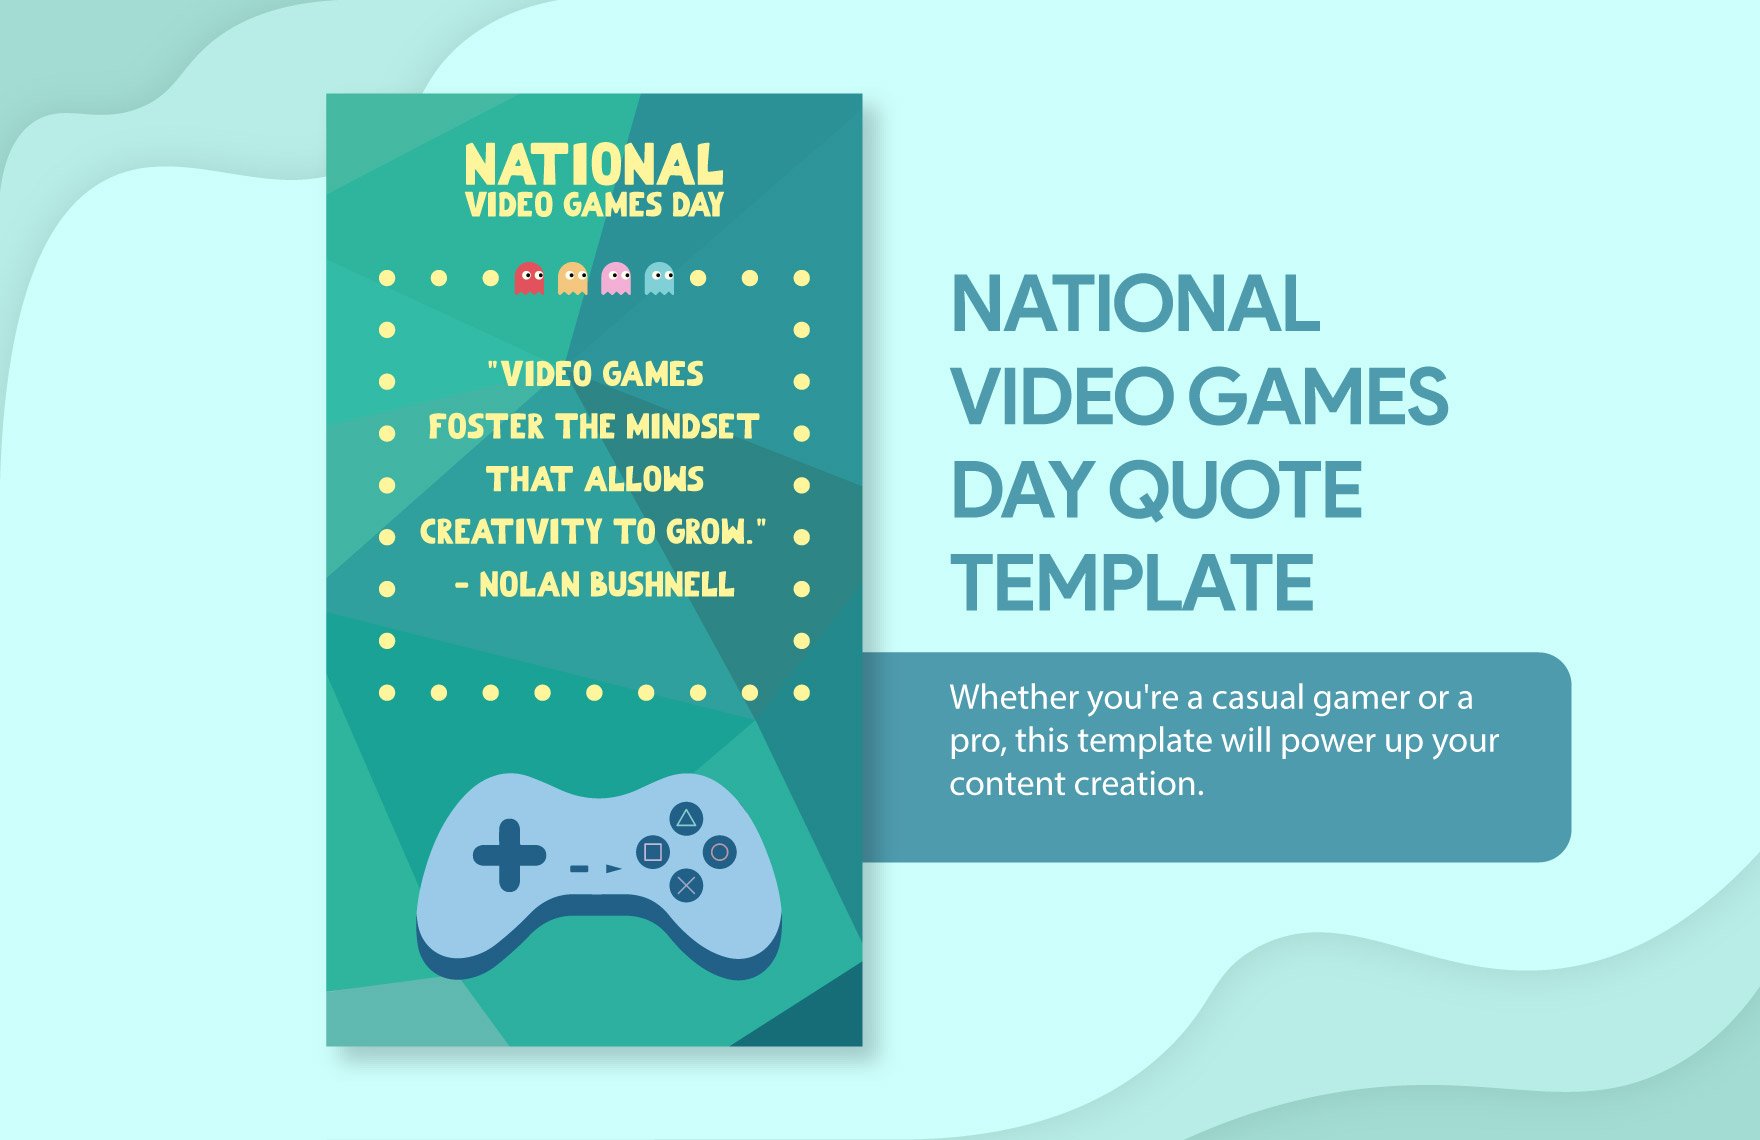 Free National Video Games Day Quote  in Illustrator, PSD, PNG